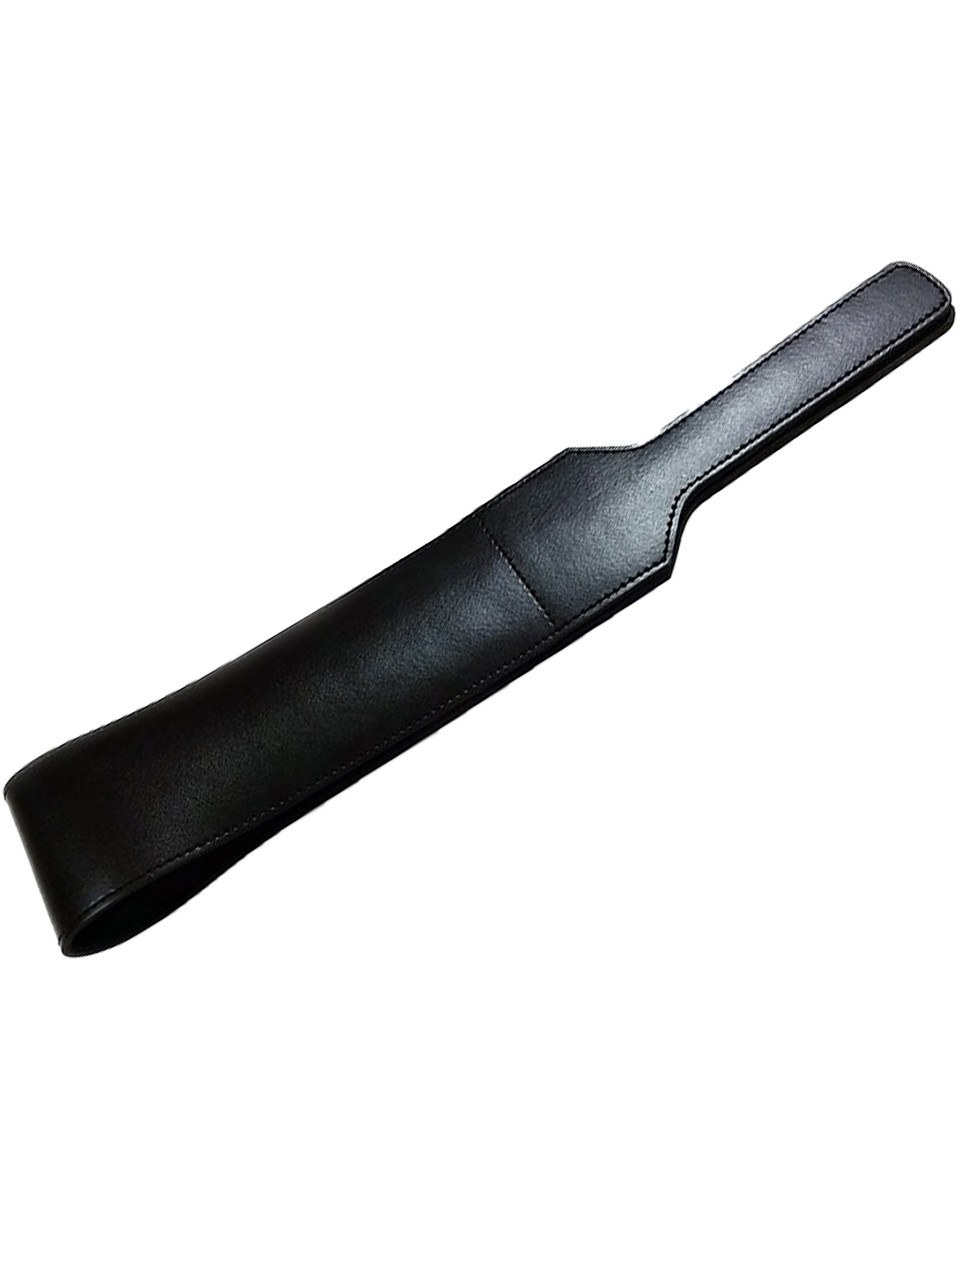 Puppy Paw Leather Paddle